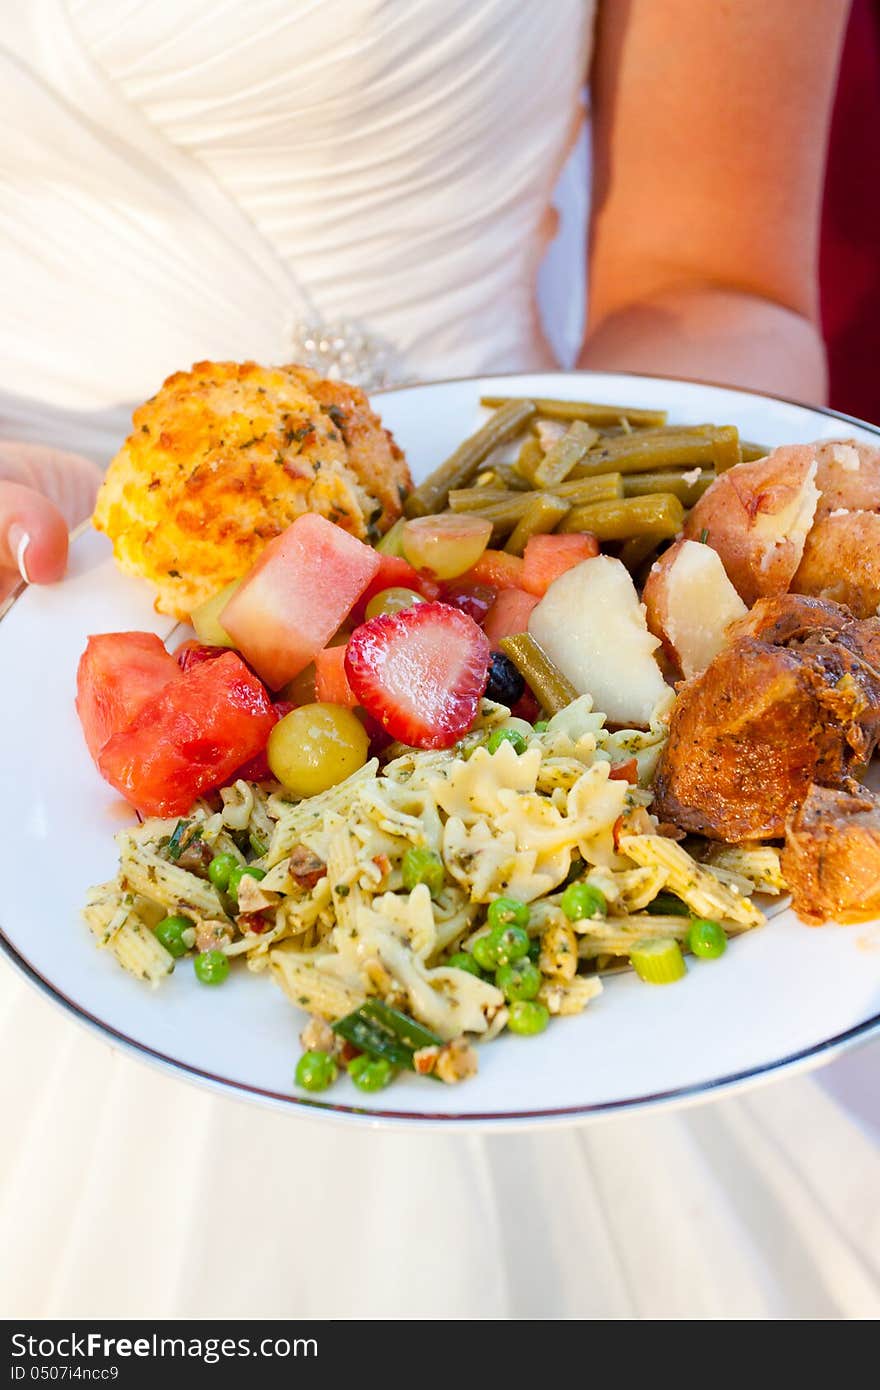 The meal of a bride on her wedding day looks healthy and cooked well with potatoes, fruit, pasta salad, green beans, chicken and more. The meal of a bride on her wedding day looks healthy and cooked well with potatoes, fruit, pasta salad, green beans, chicken and more.